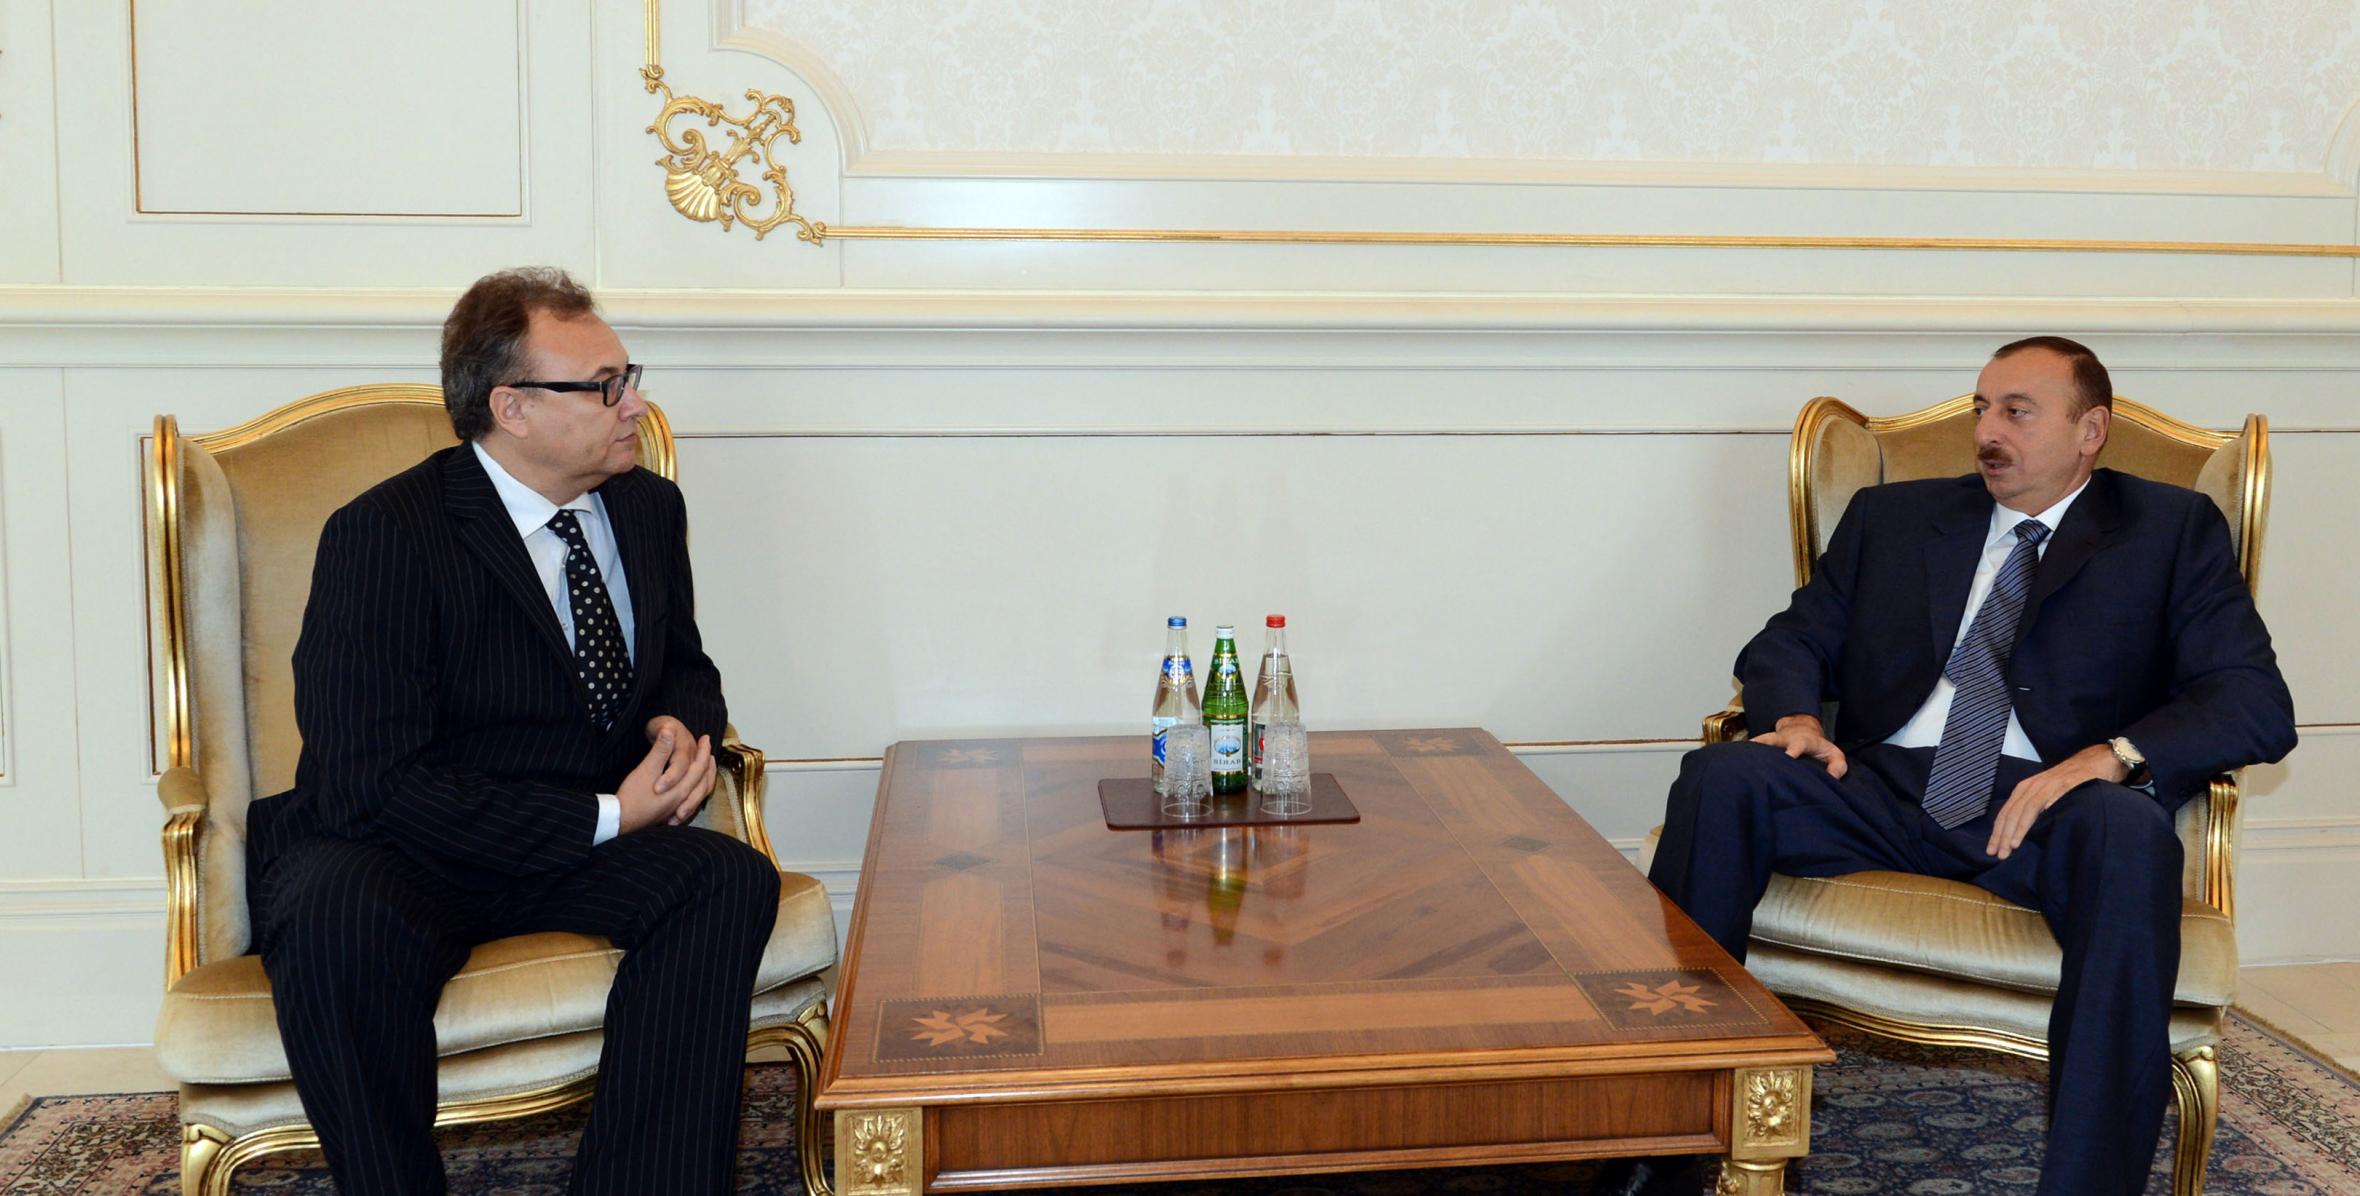 Ilham Aliyev accepted the credentials of a newly-appointed Ambassador Extraordinary and Plenipotentiary of the Republic of Lithuania to Azerbaijan